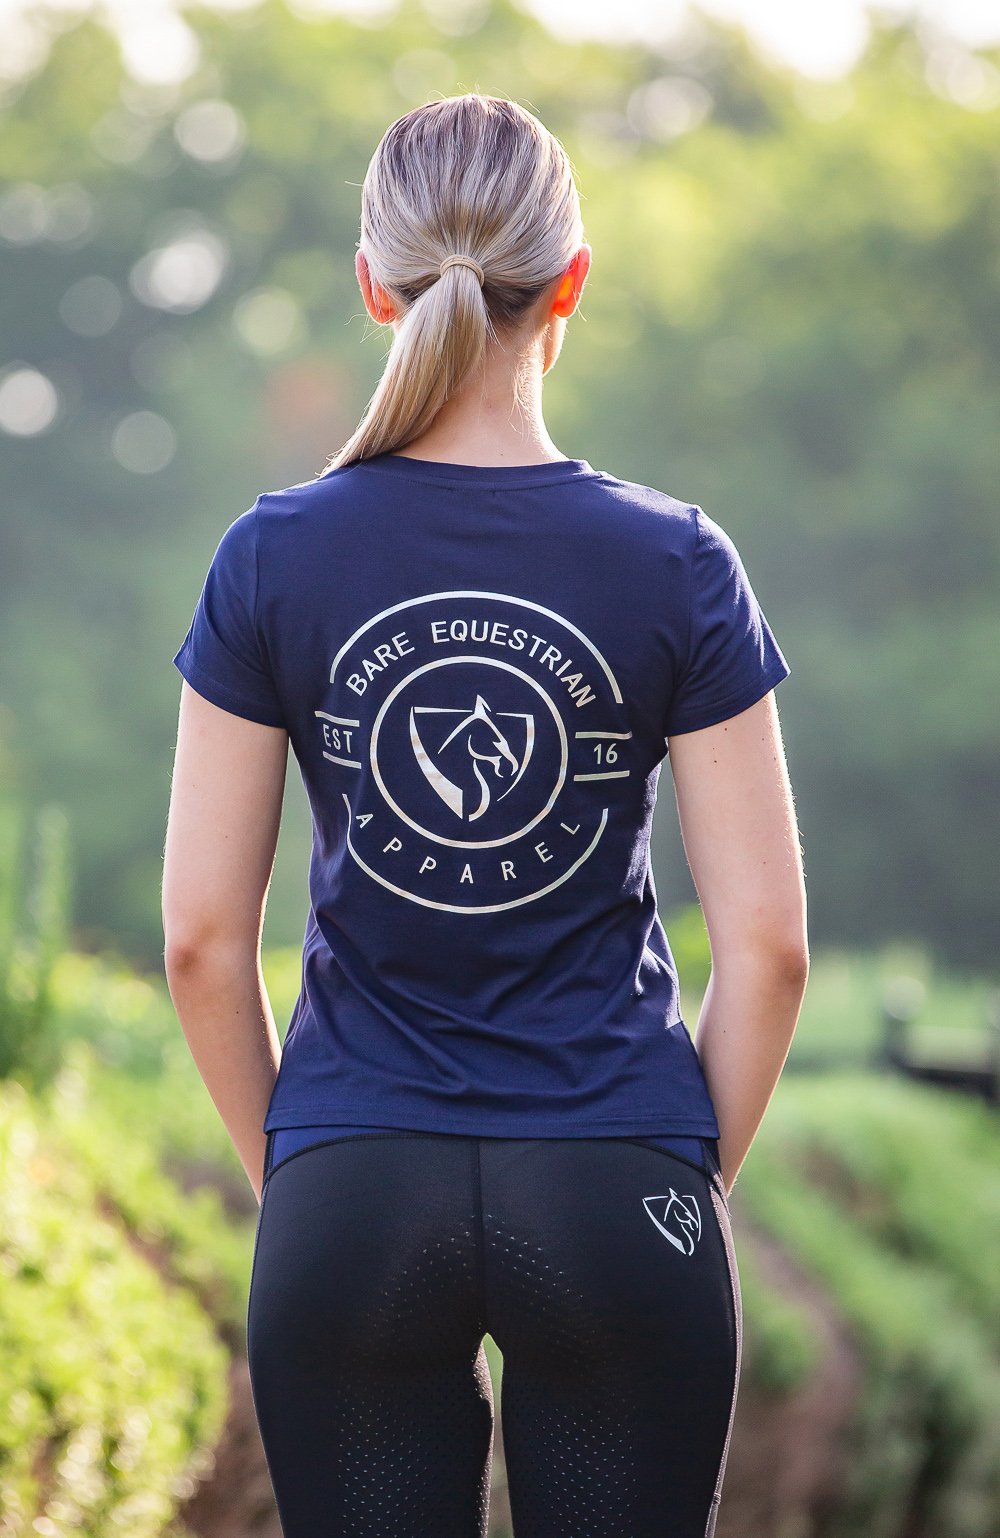 BARE Emblem T-Shirt - Navy and Silver